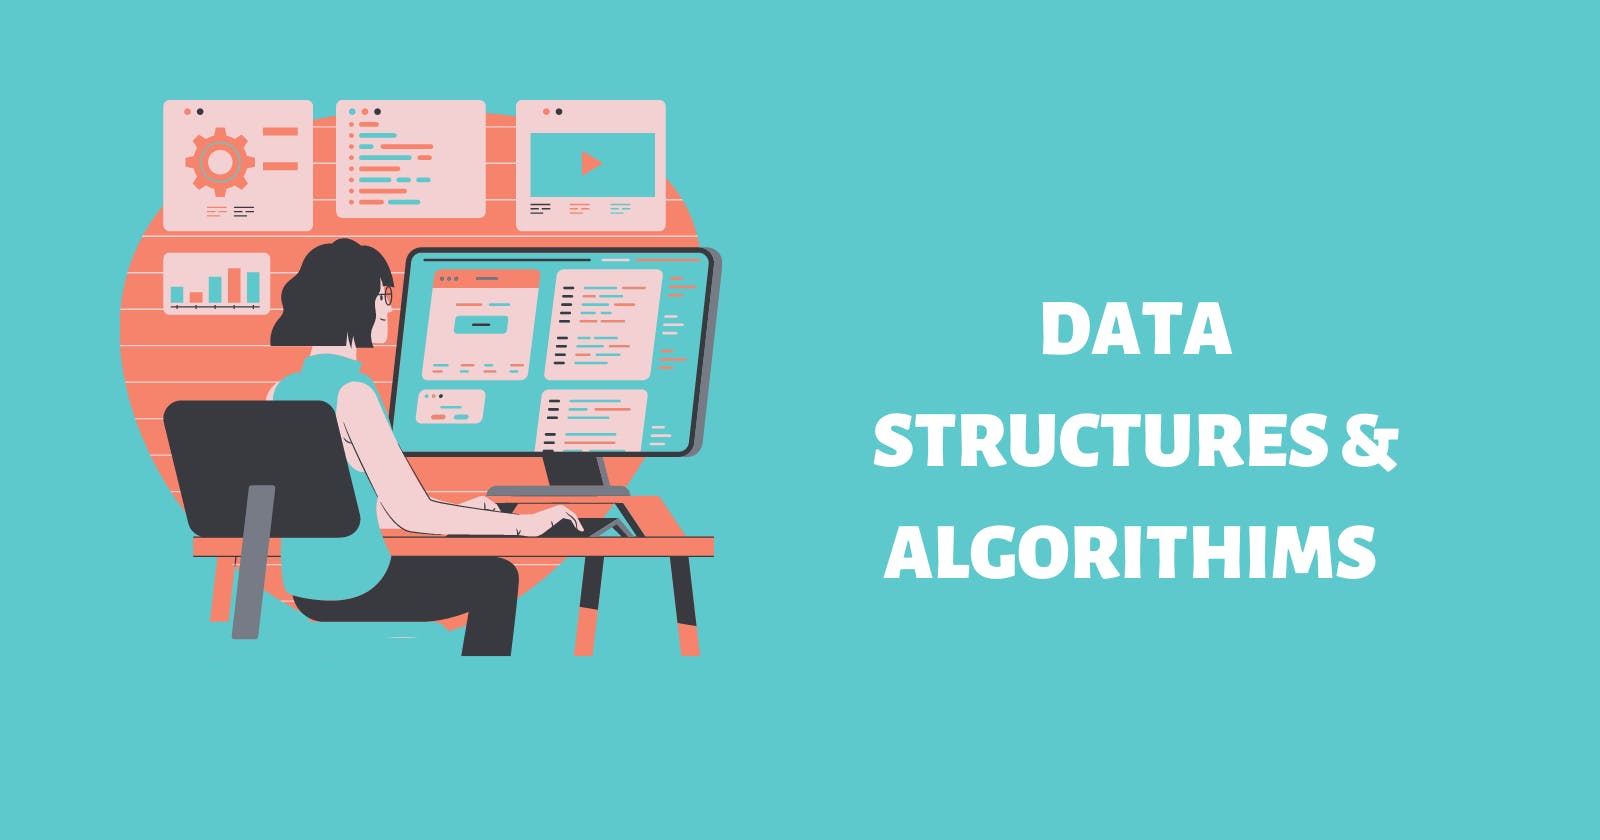 All about Data Structures & Algorithms